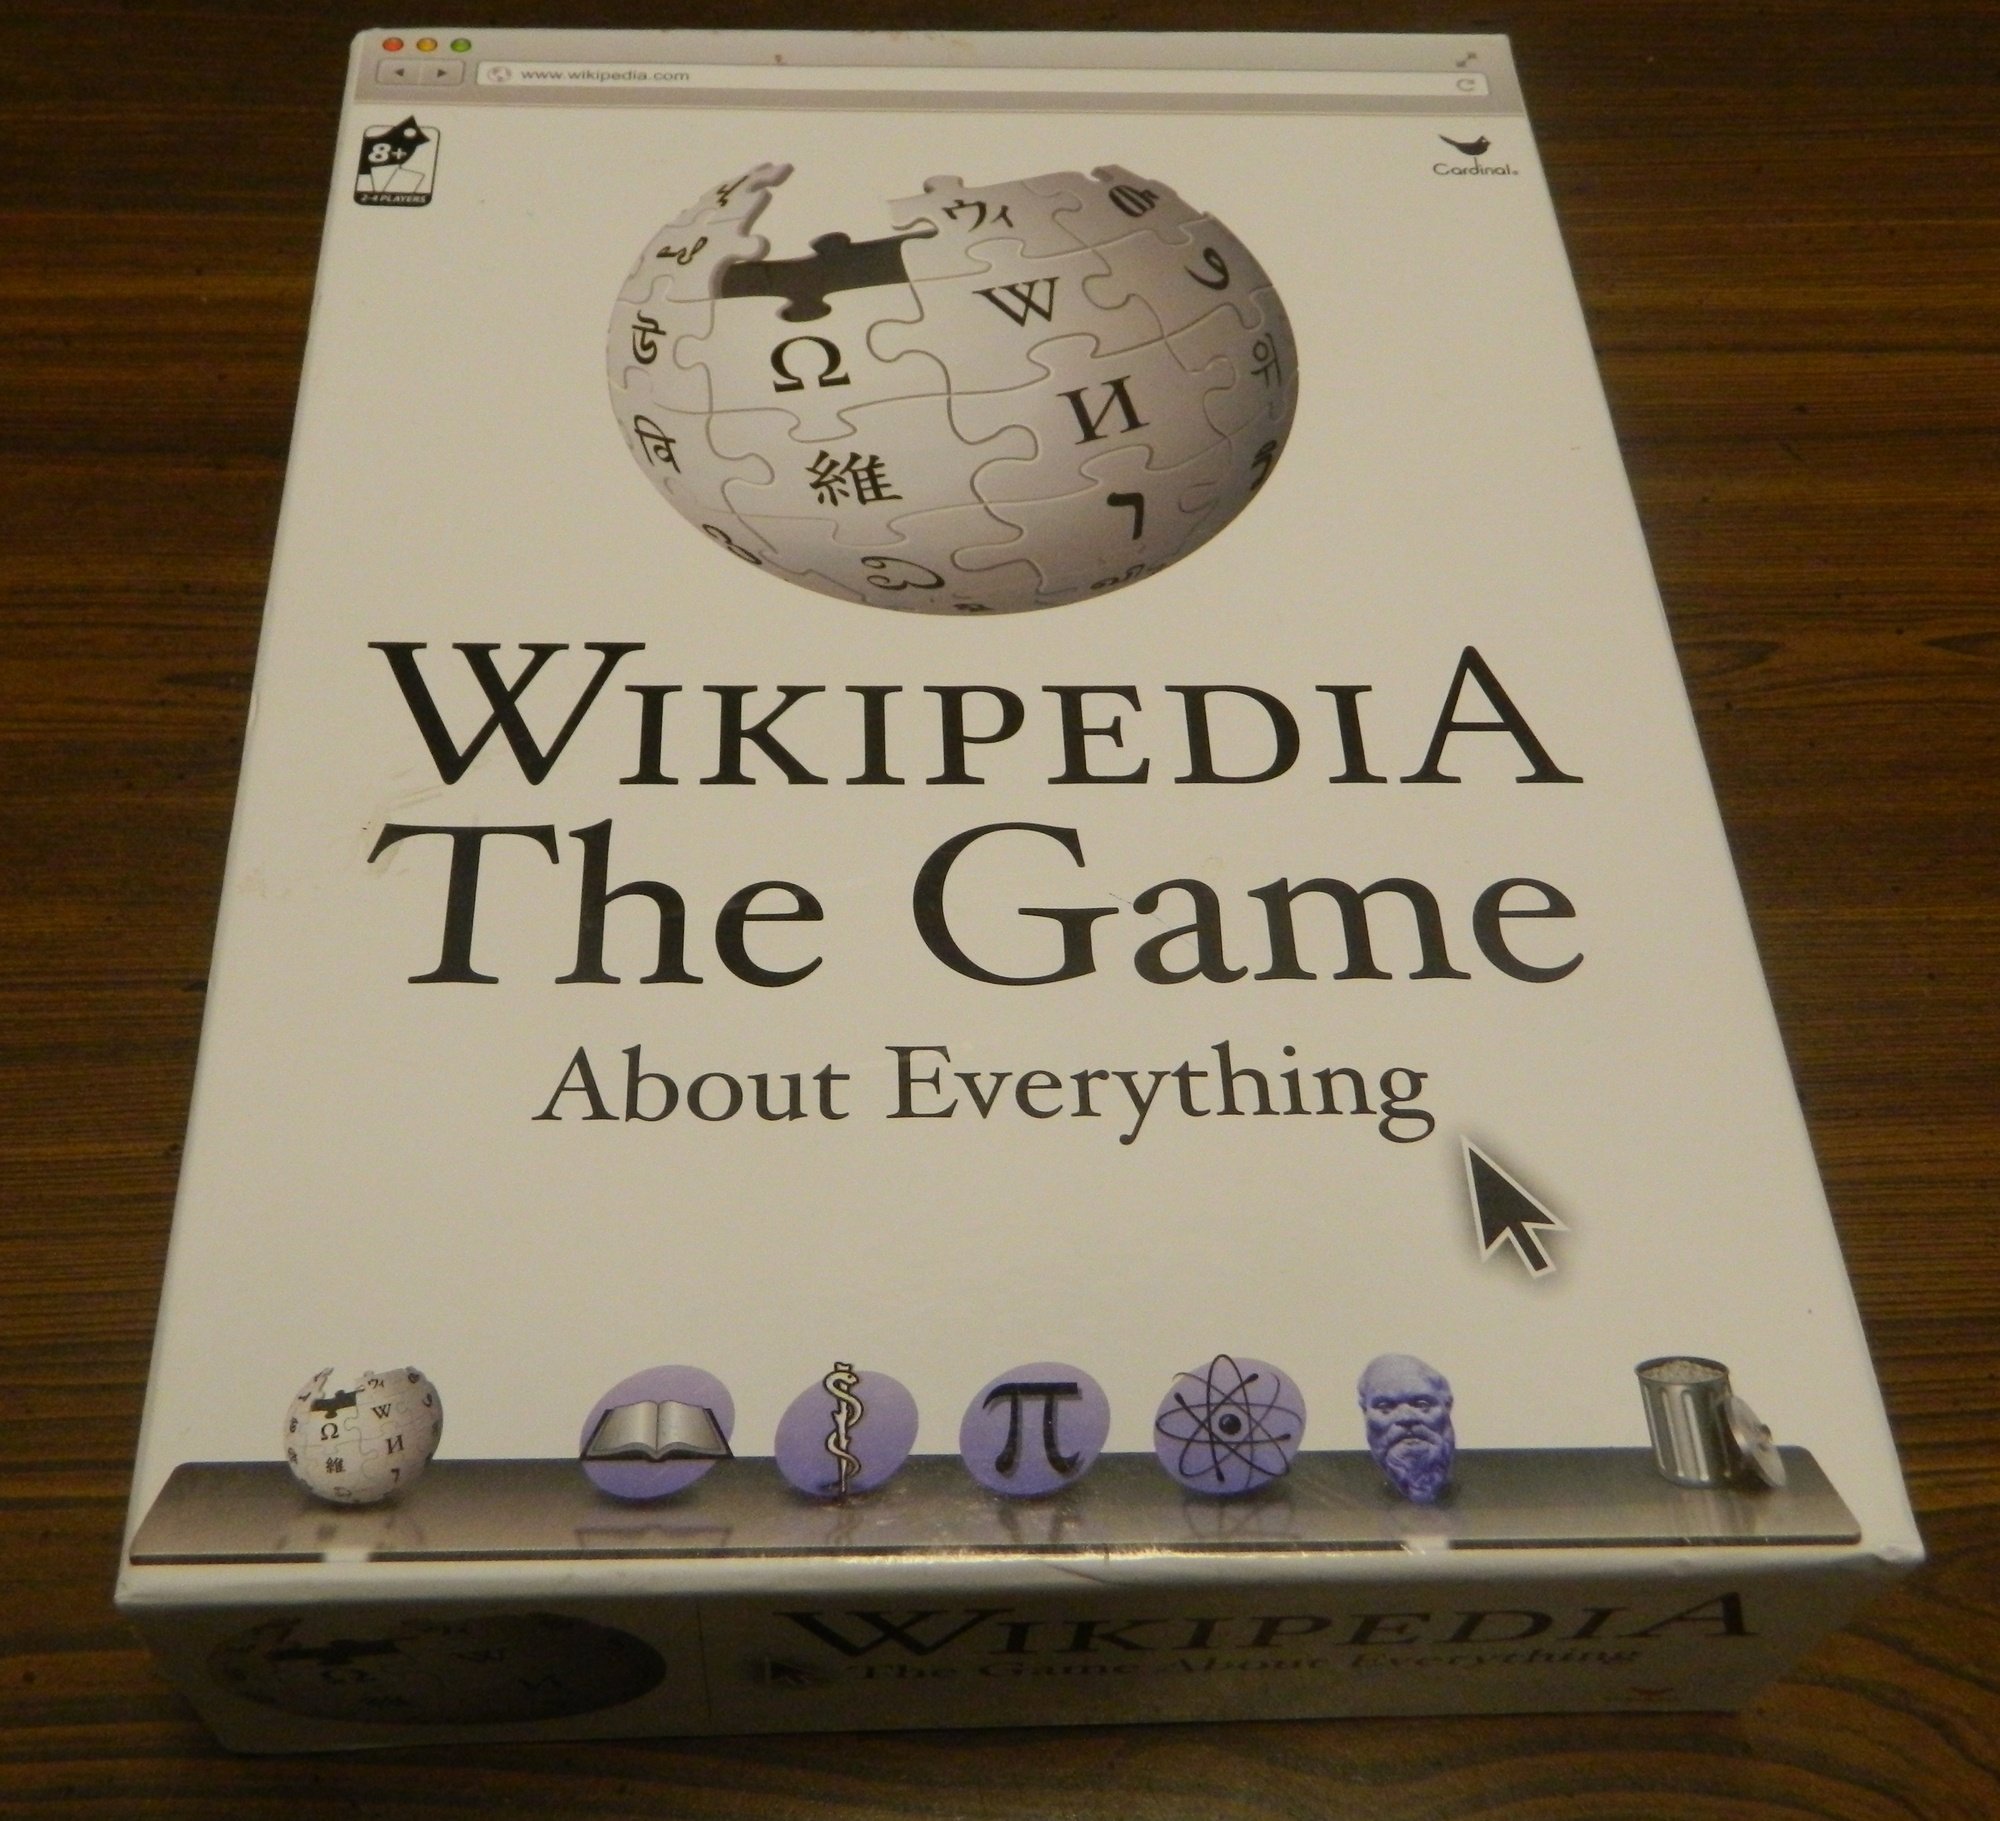 the Wiki Game: Reviews, Features, Pricing & Download